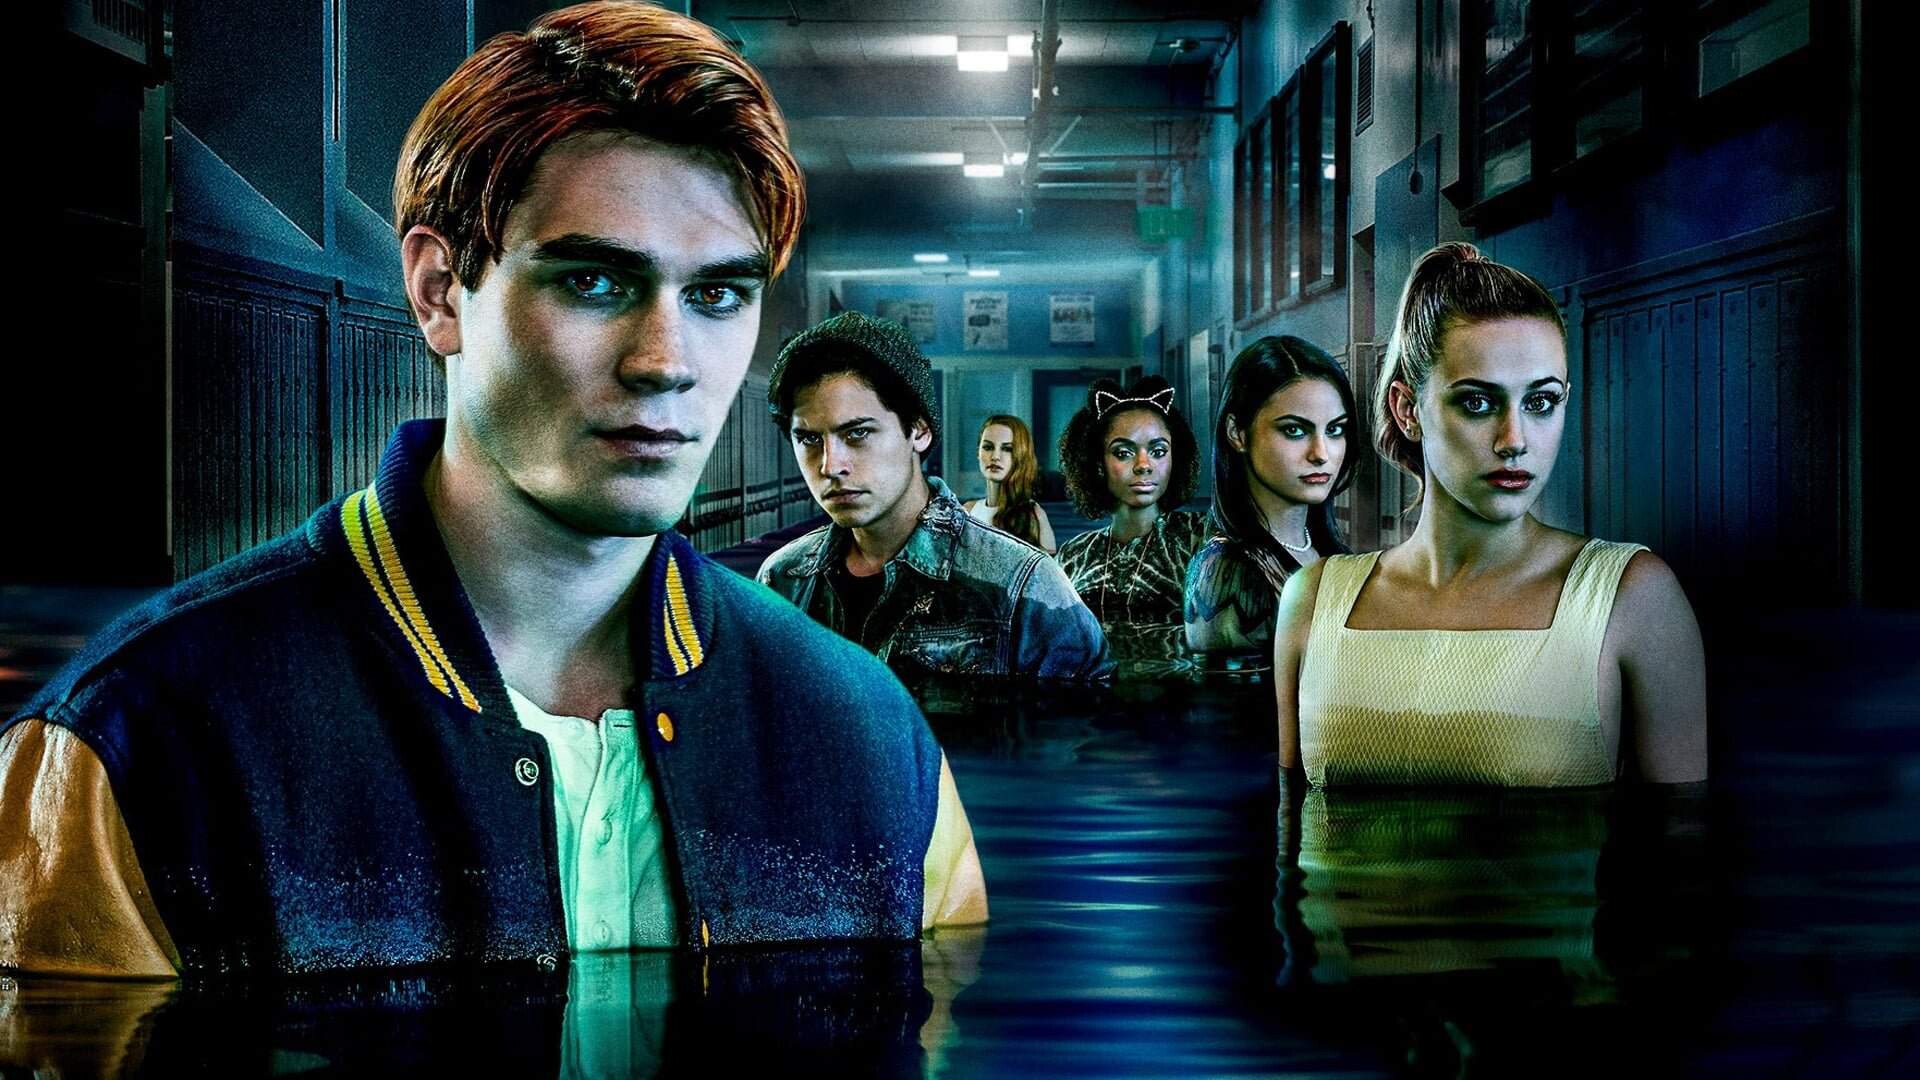 Riverdale (TV Series): Archie Andrews, A former sergeant in the army and is now an RROTC instructor at his old high school. 1920x1080 Full HD Wallpaper.